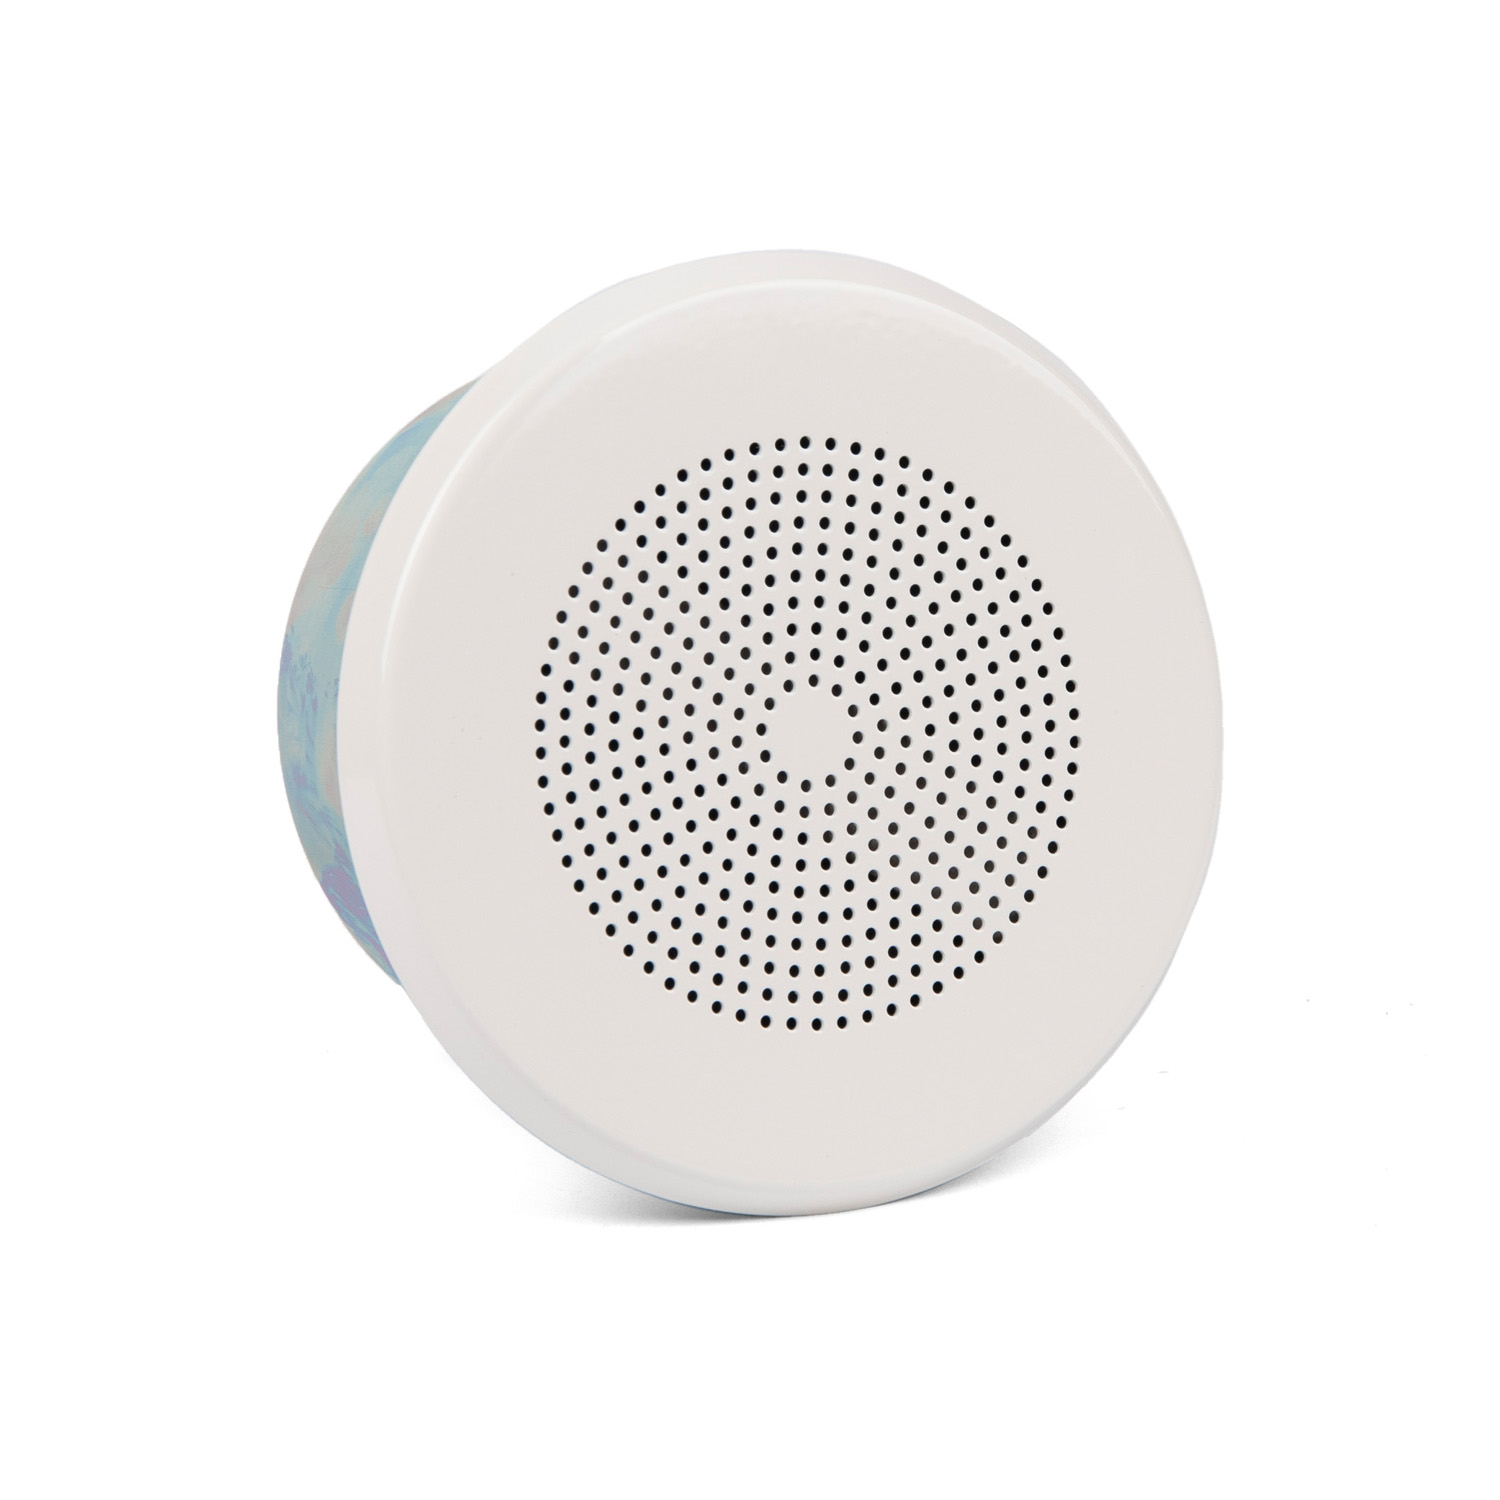 STC-1104 Ceiling speaker 6W/100V with steel fire dome/fuse/ceramic terminals